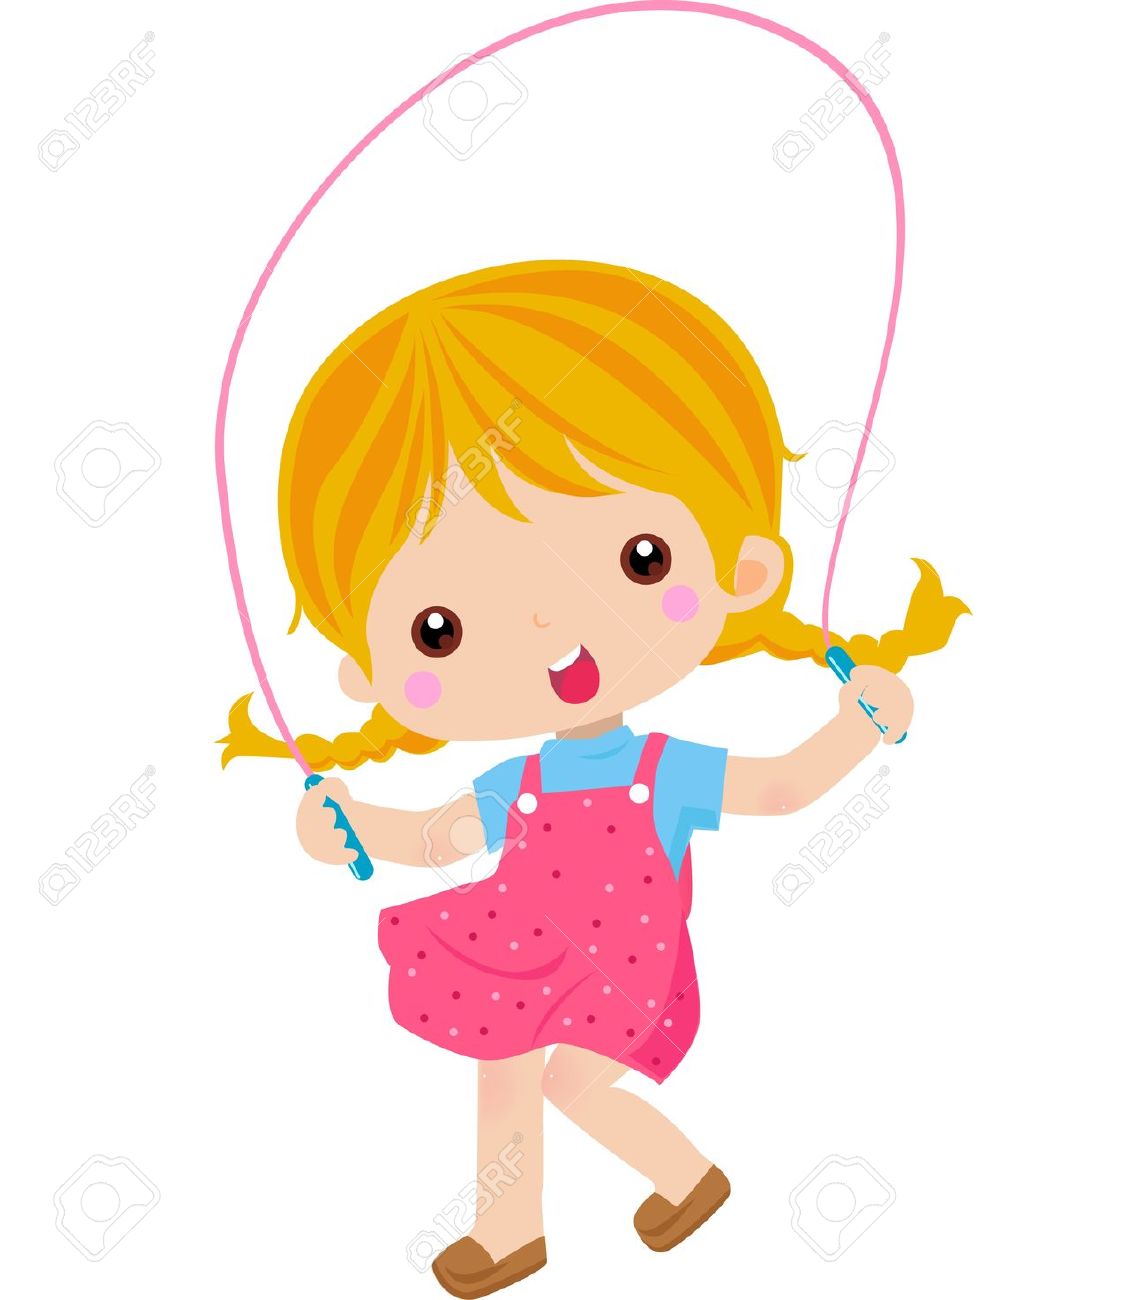 animated clip art jumping rope - photo #45